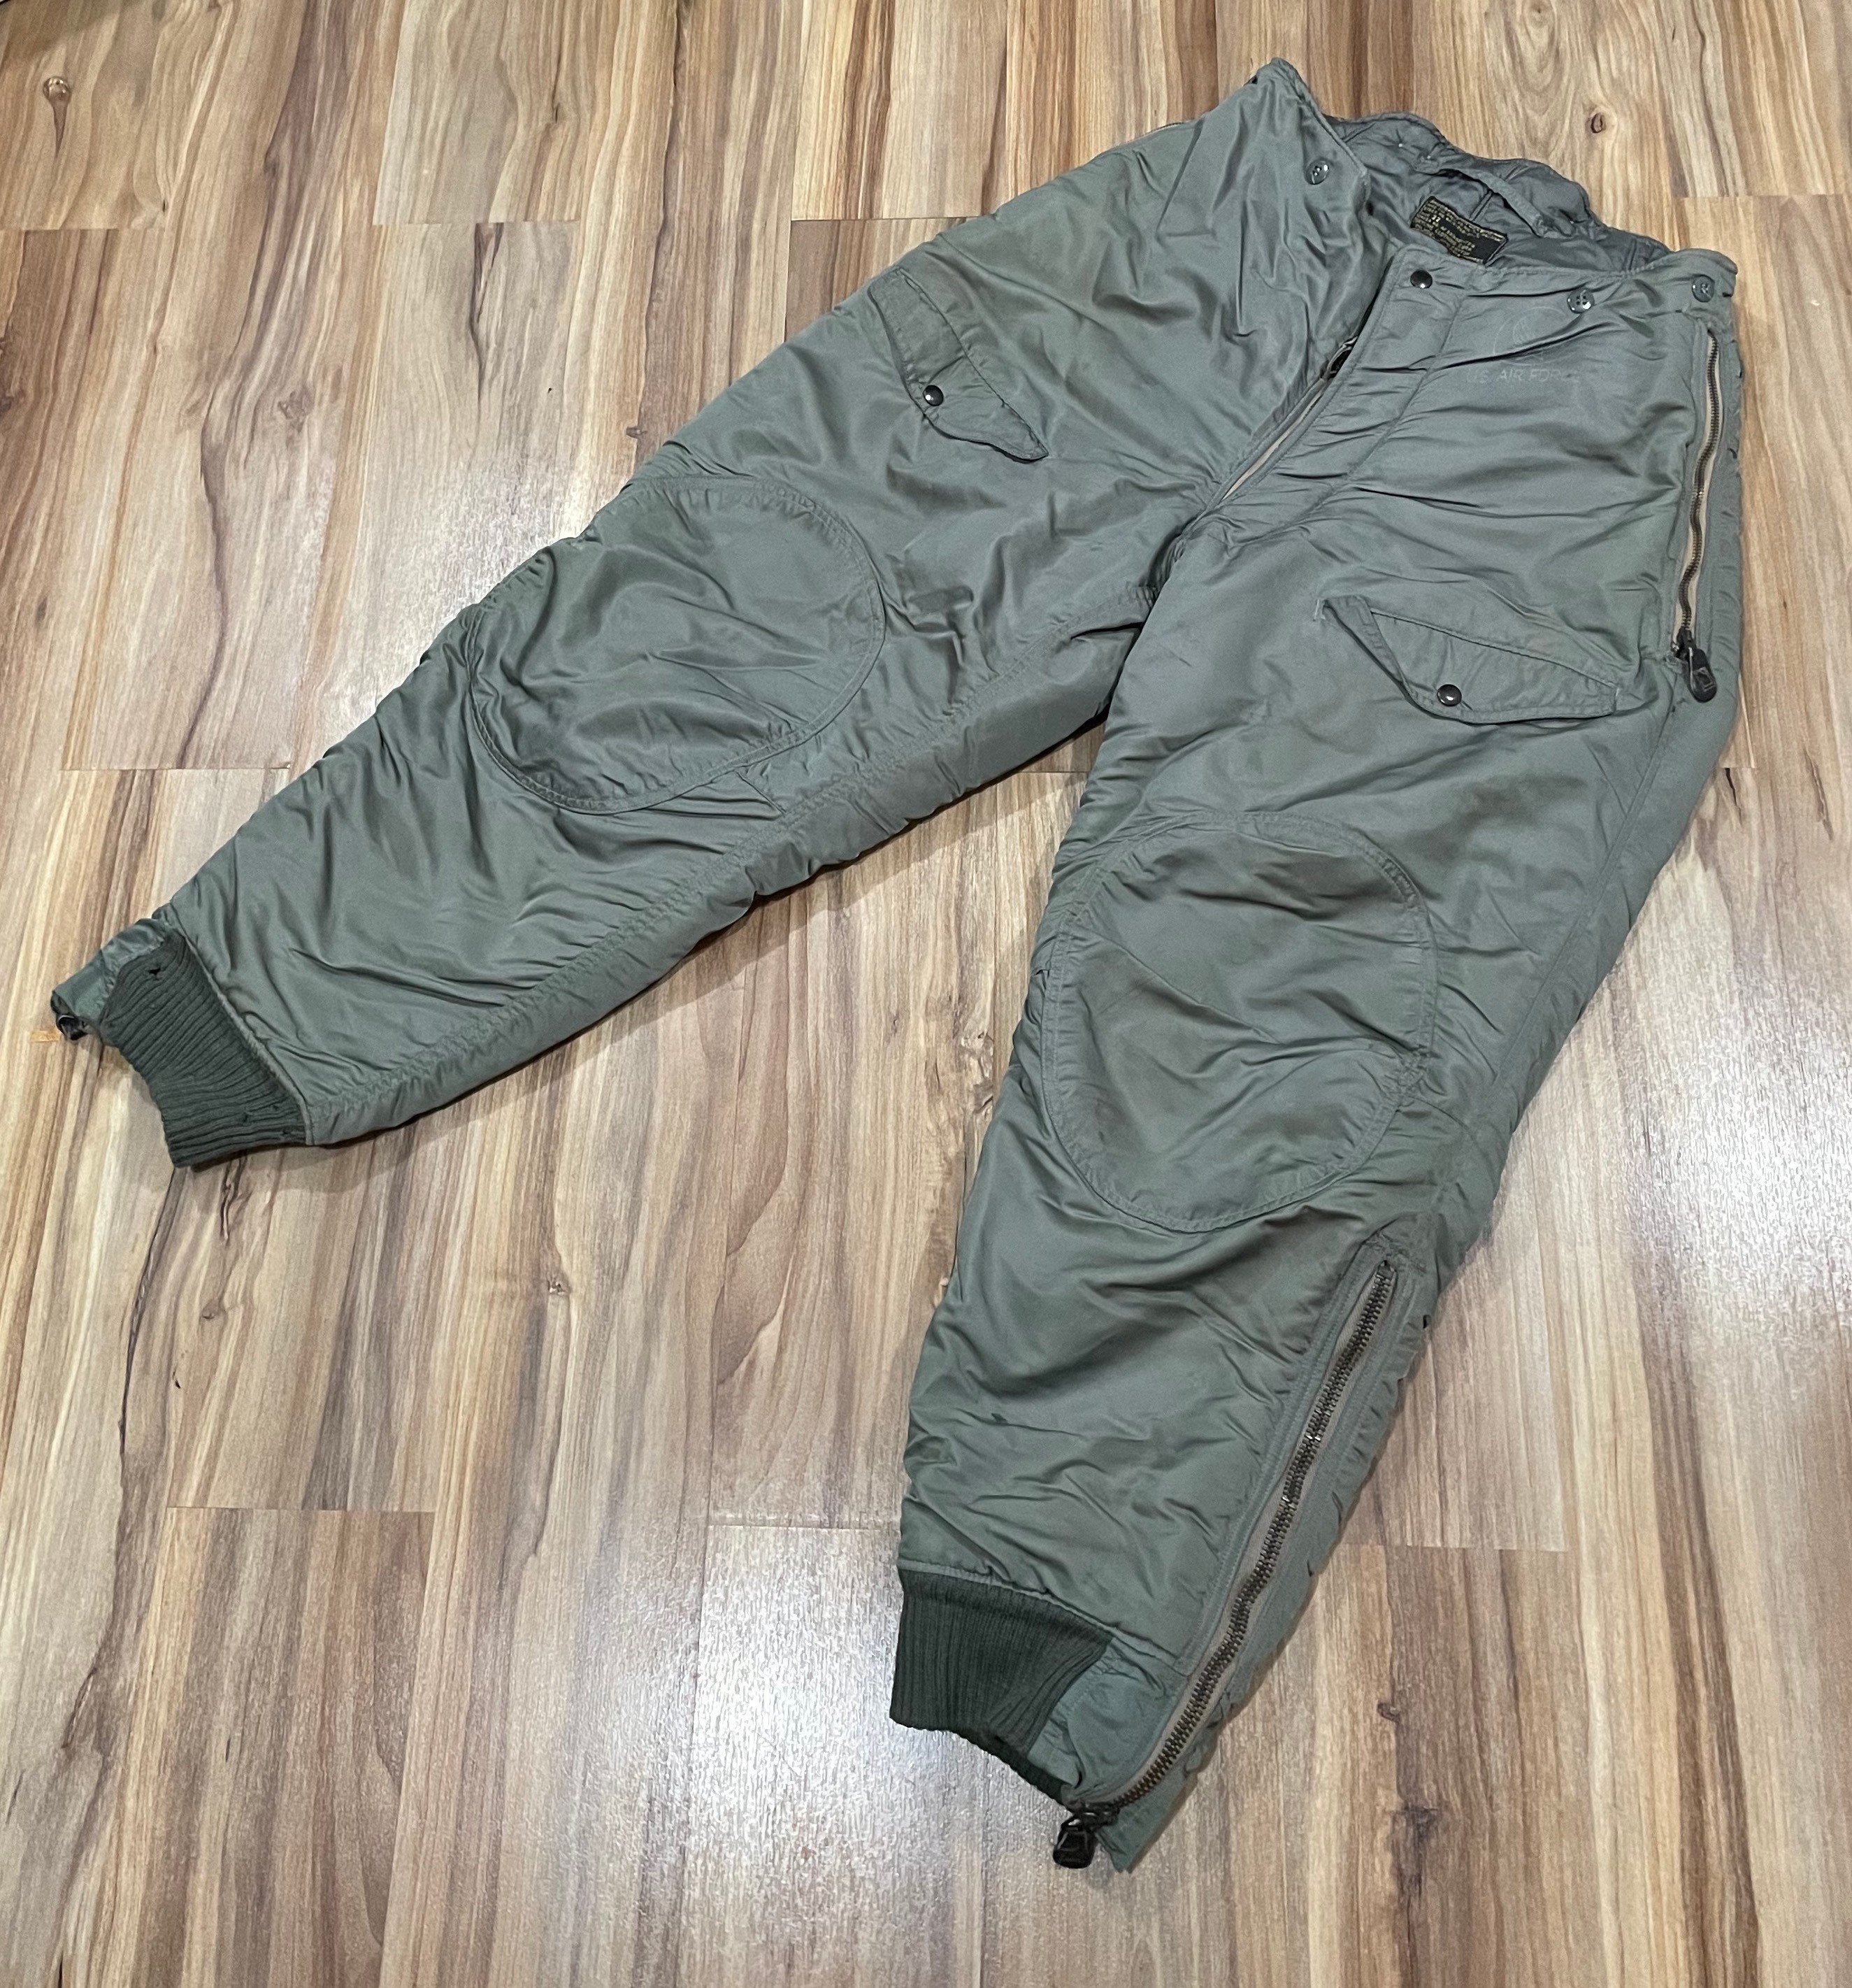 USAF Extreme Cold Weather Insulated Trousers Type F-1B Size 30 Made in  U.S.A. -  Canada